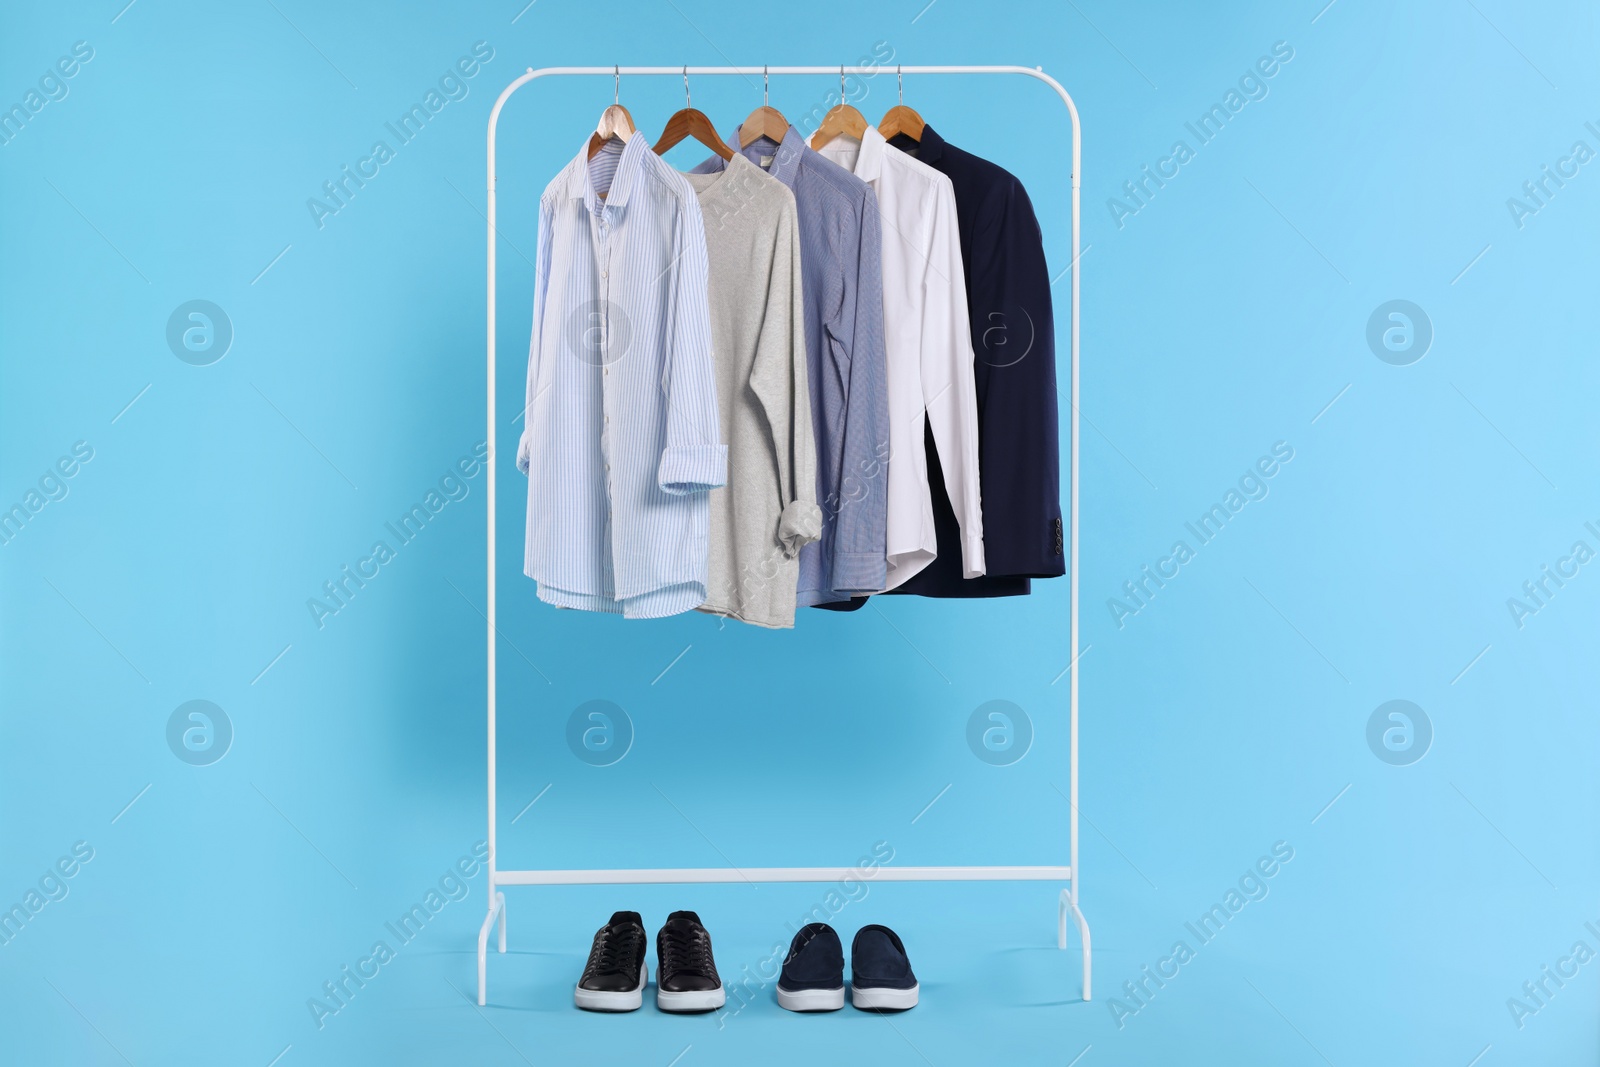 Photo of Rack with stylish clothes on wooden hangers and sneakers against light blue background